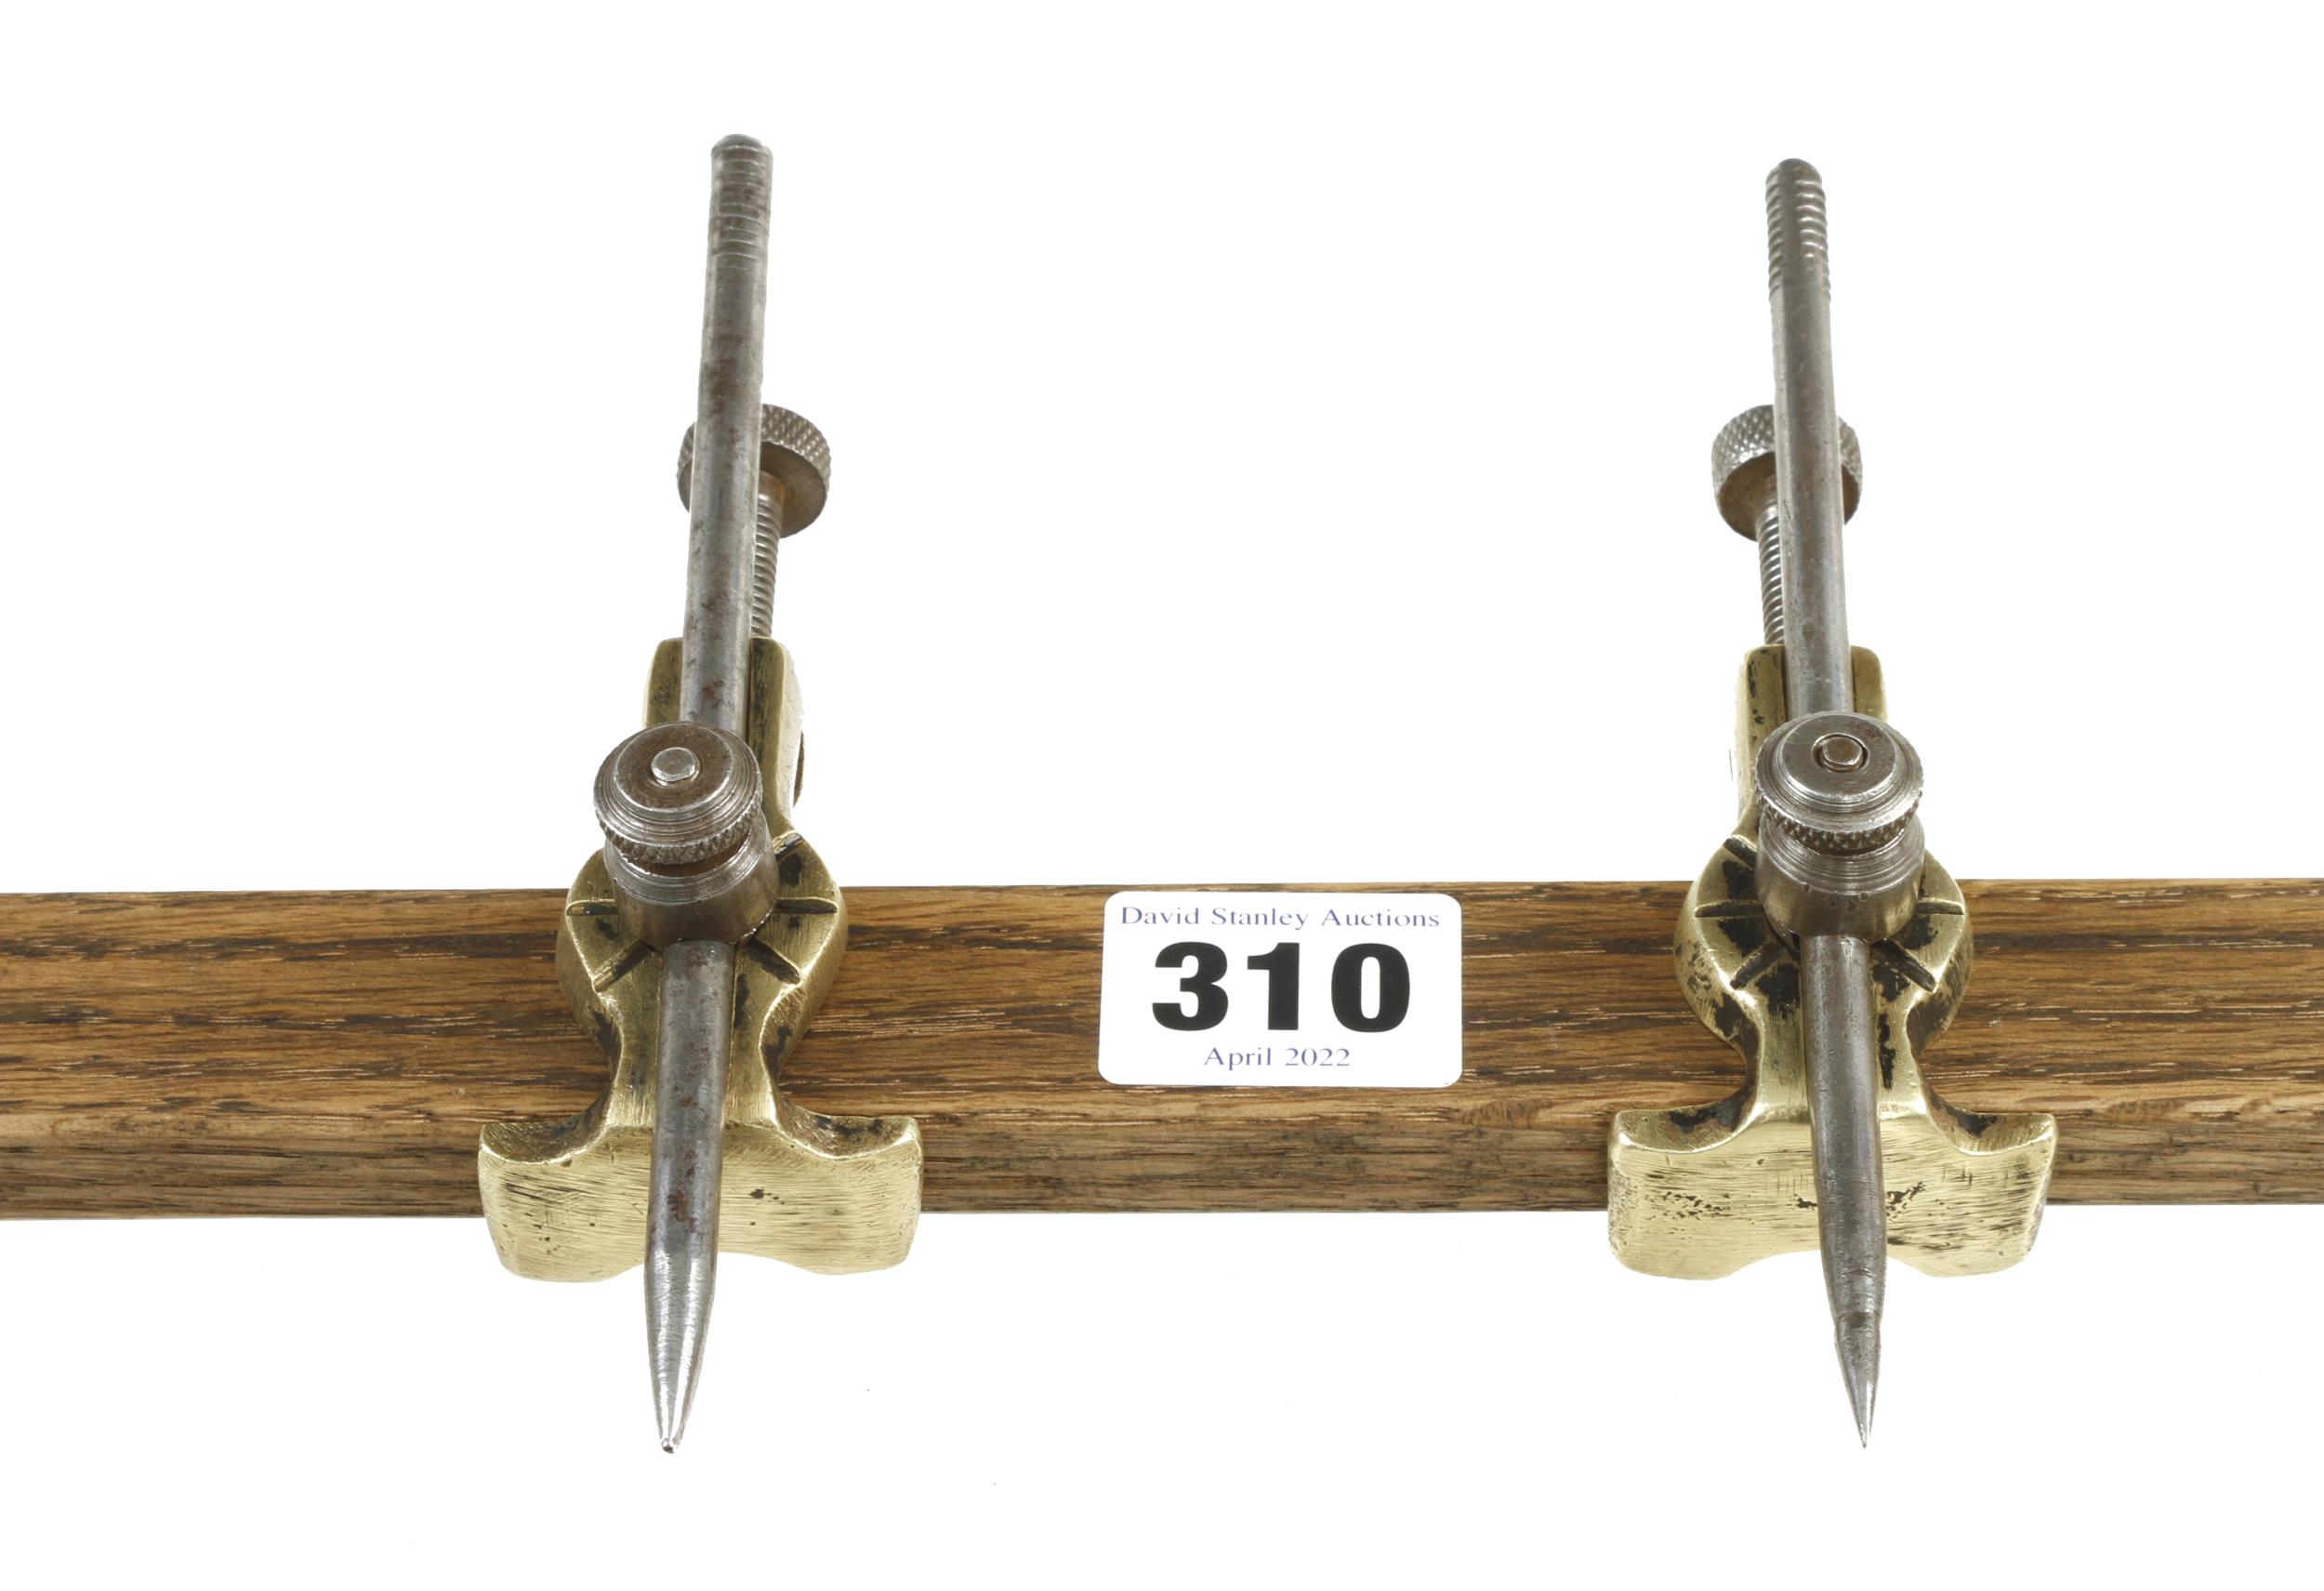 A pair of brass trammels with adjustable steel points G